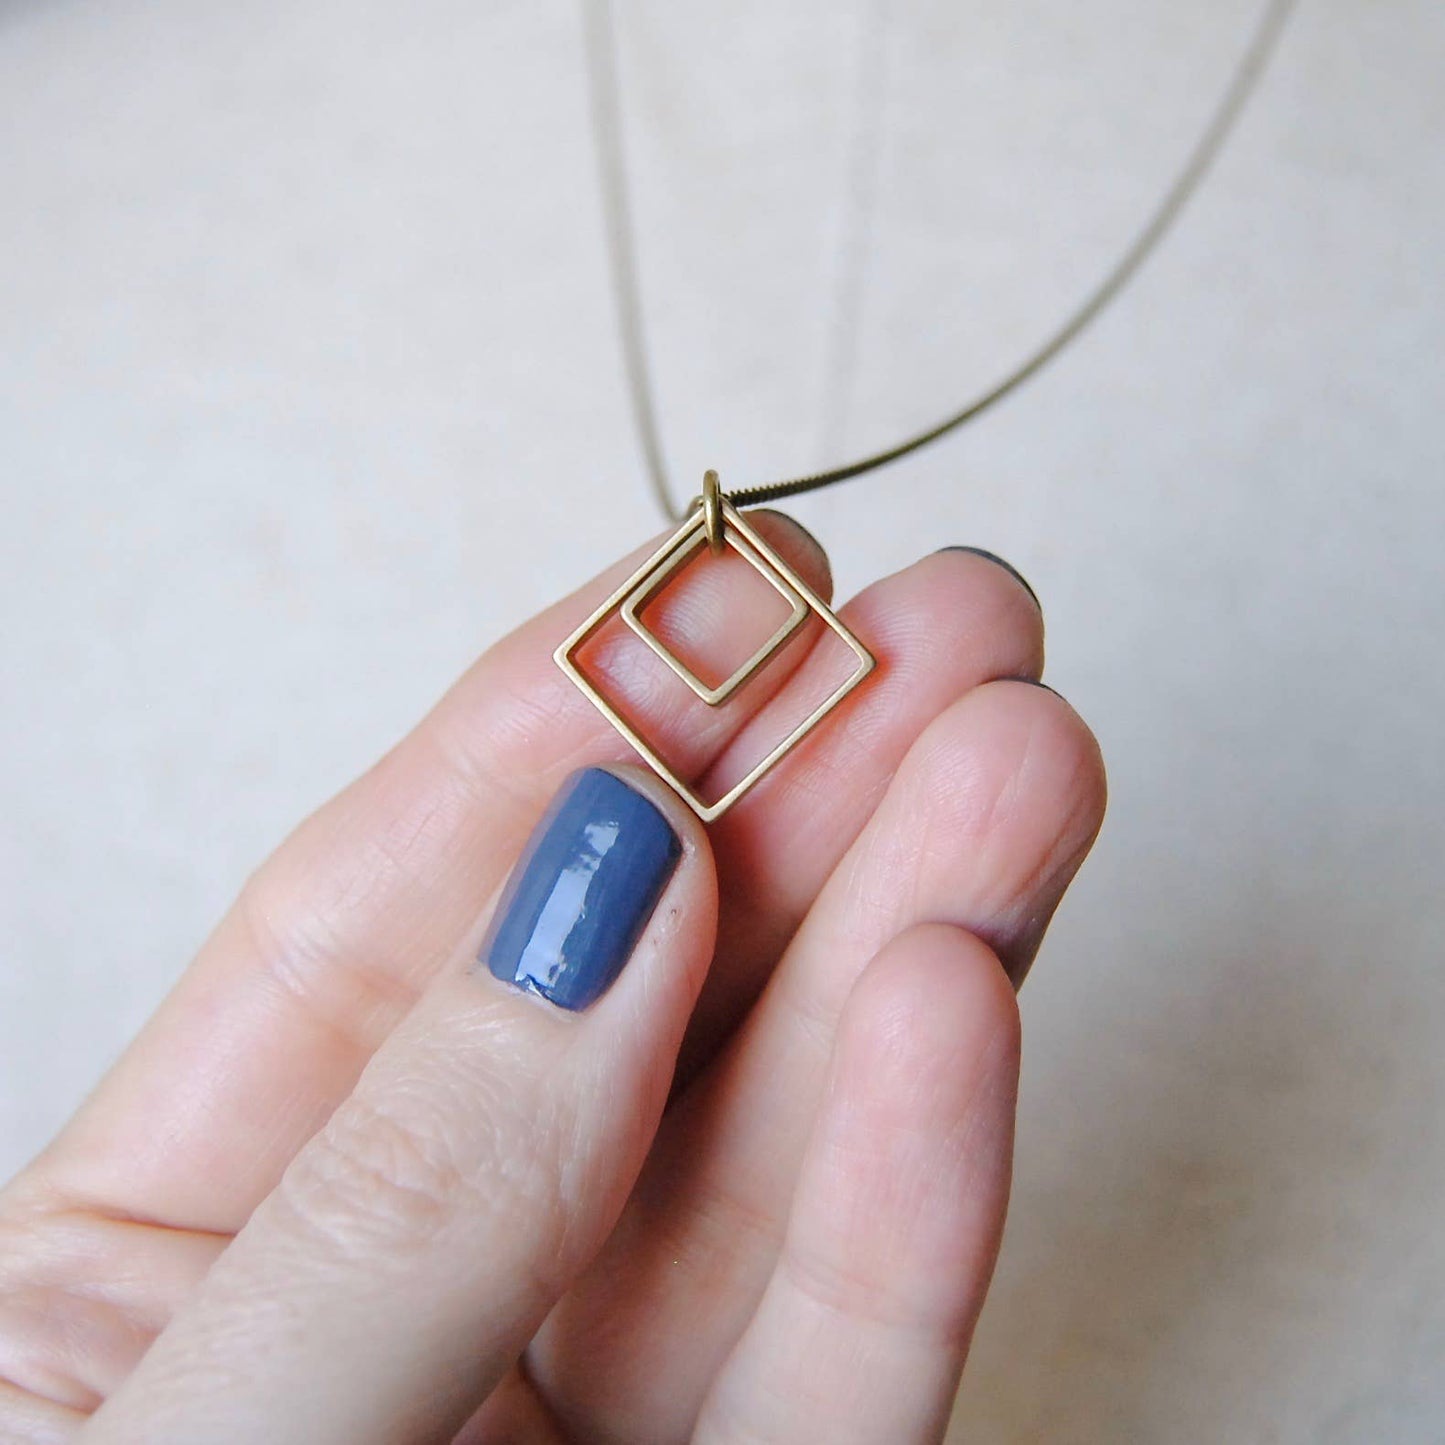 Paired Squares Necklace